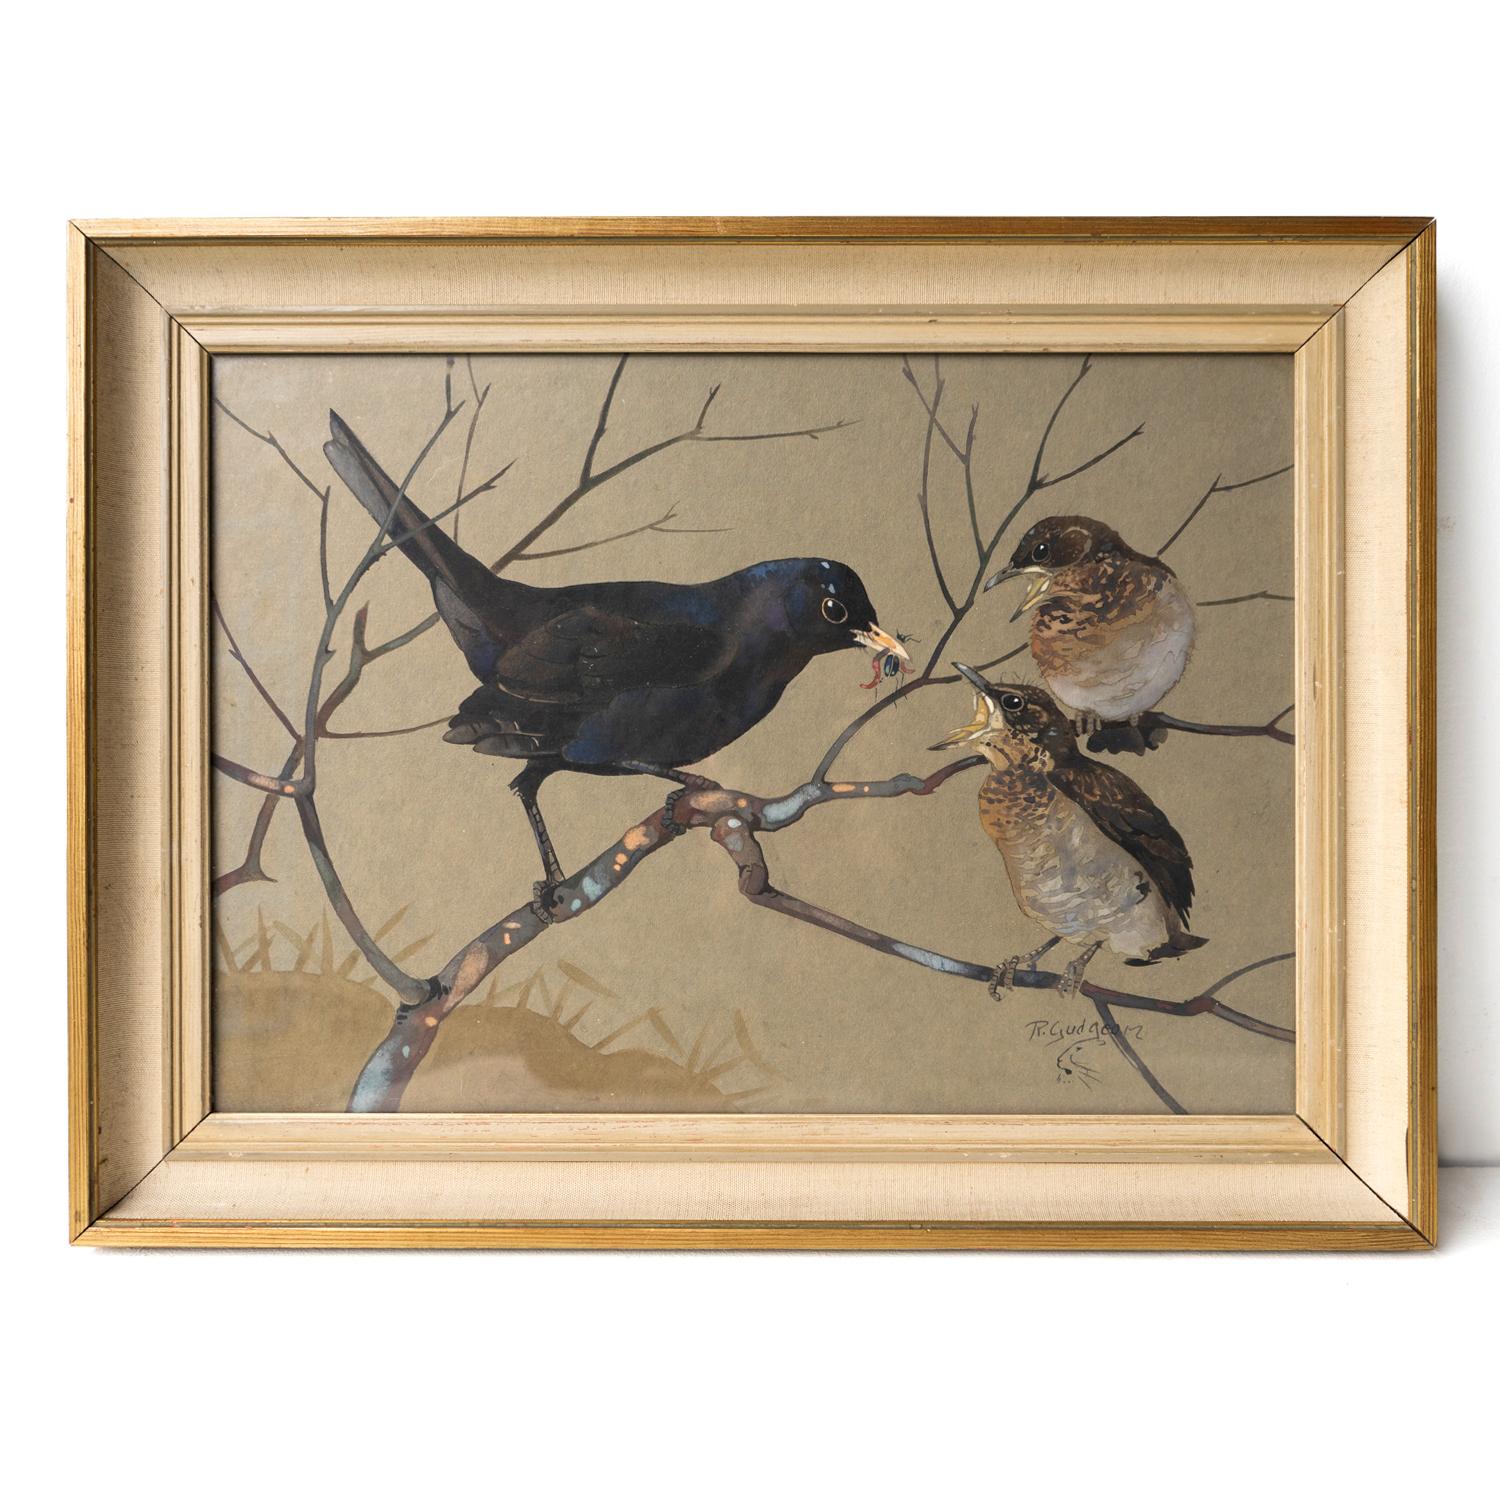 ORIGINAL WATERCOLOUR BIRD PAINTING BY RALSTON R. B. GUDGEON R.S.W. SCOTTISH (1910-1984)
A masterful depiction of a blackbird feeding his young on a branch. The artist has really captured the character of the birds with great skill whilst also